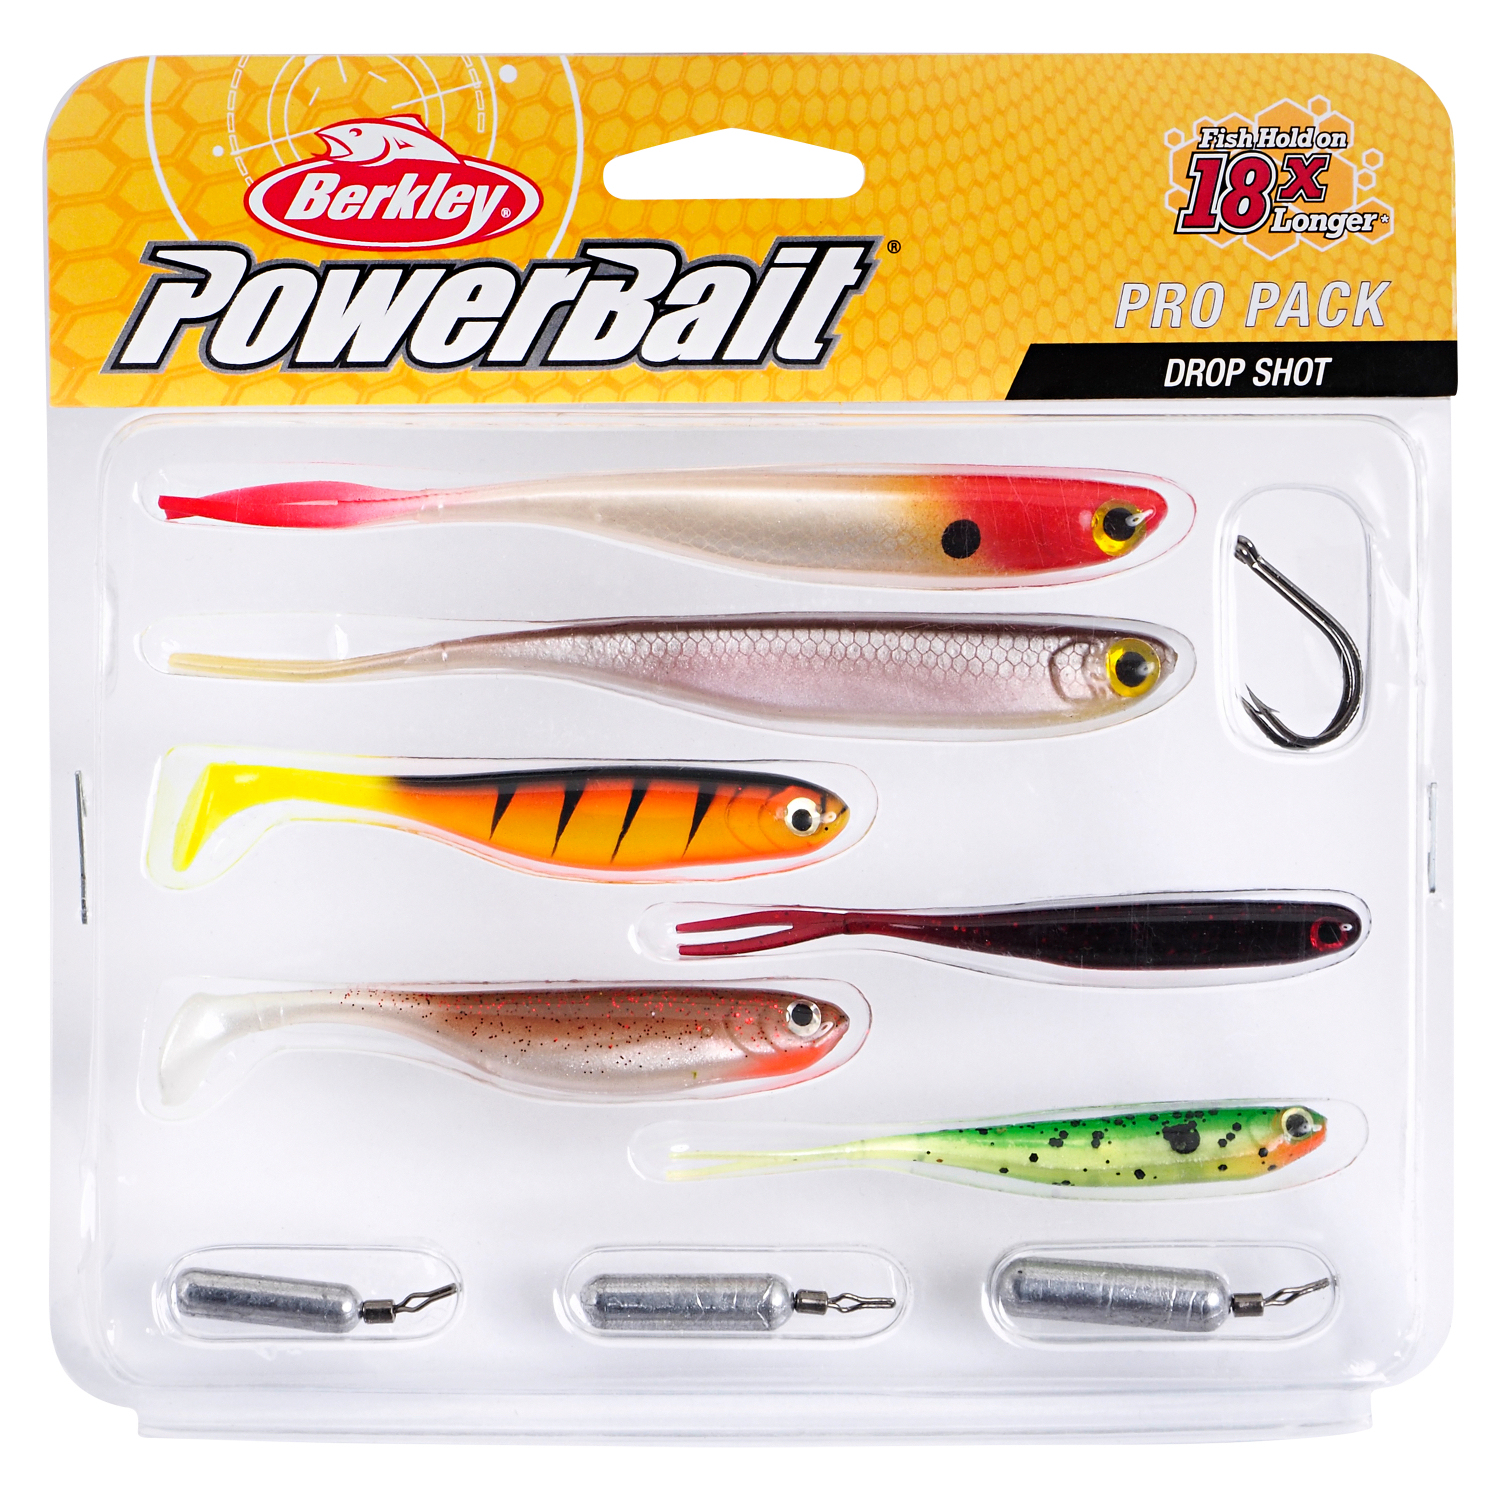 Berkley Rubber Fish Pro Pack Drop Shot at low prices